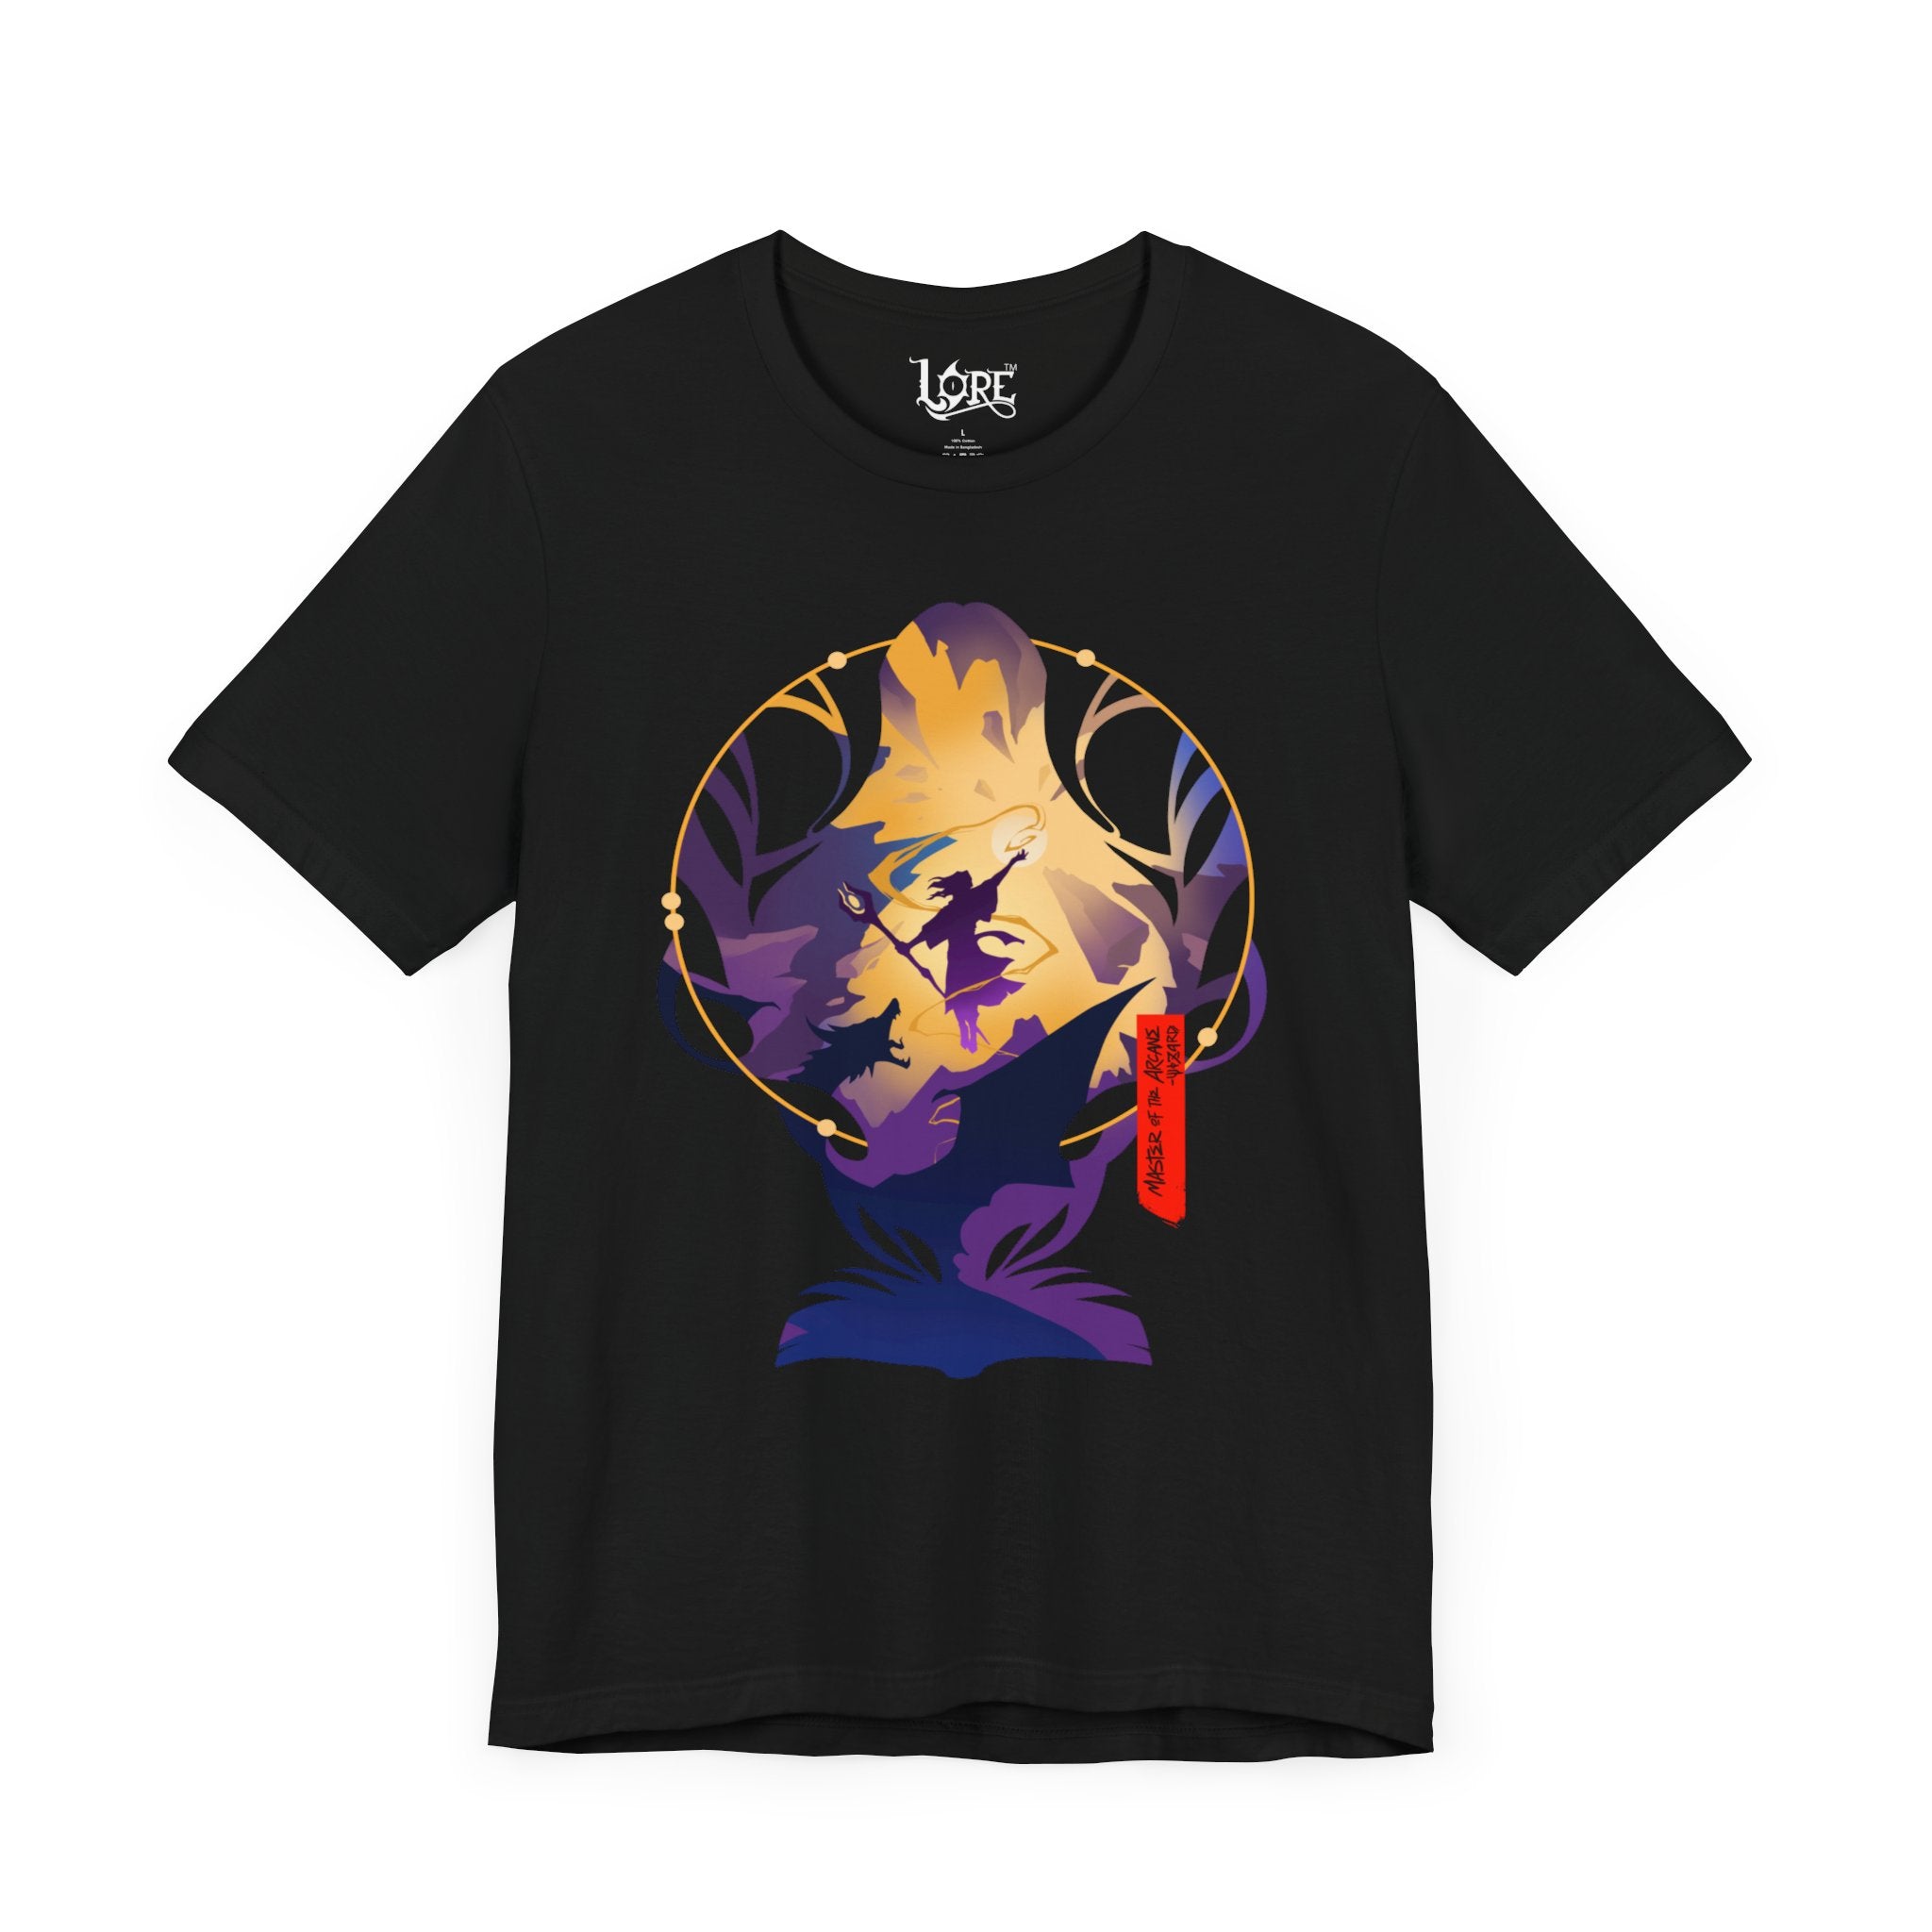 WIZARD CLASS SILHOUETTE T-SHIRT - RED BANNER EDITION